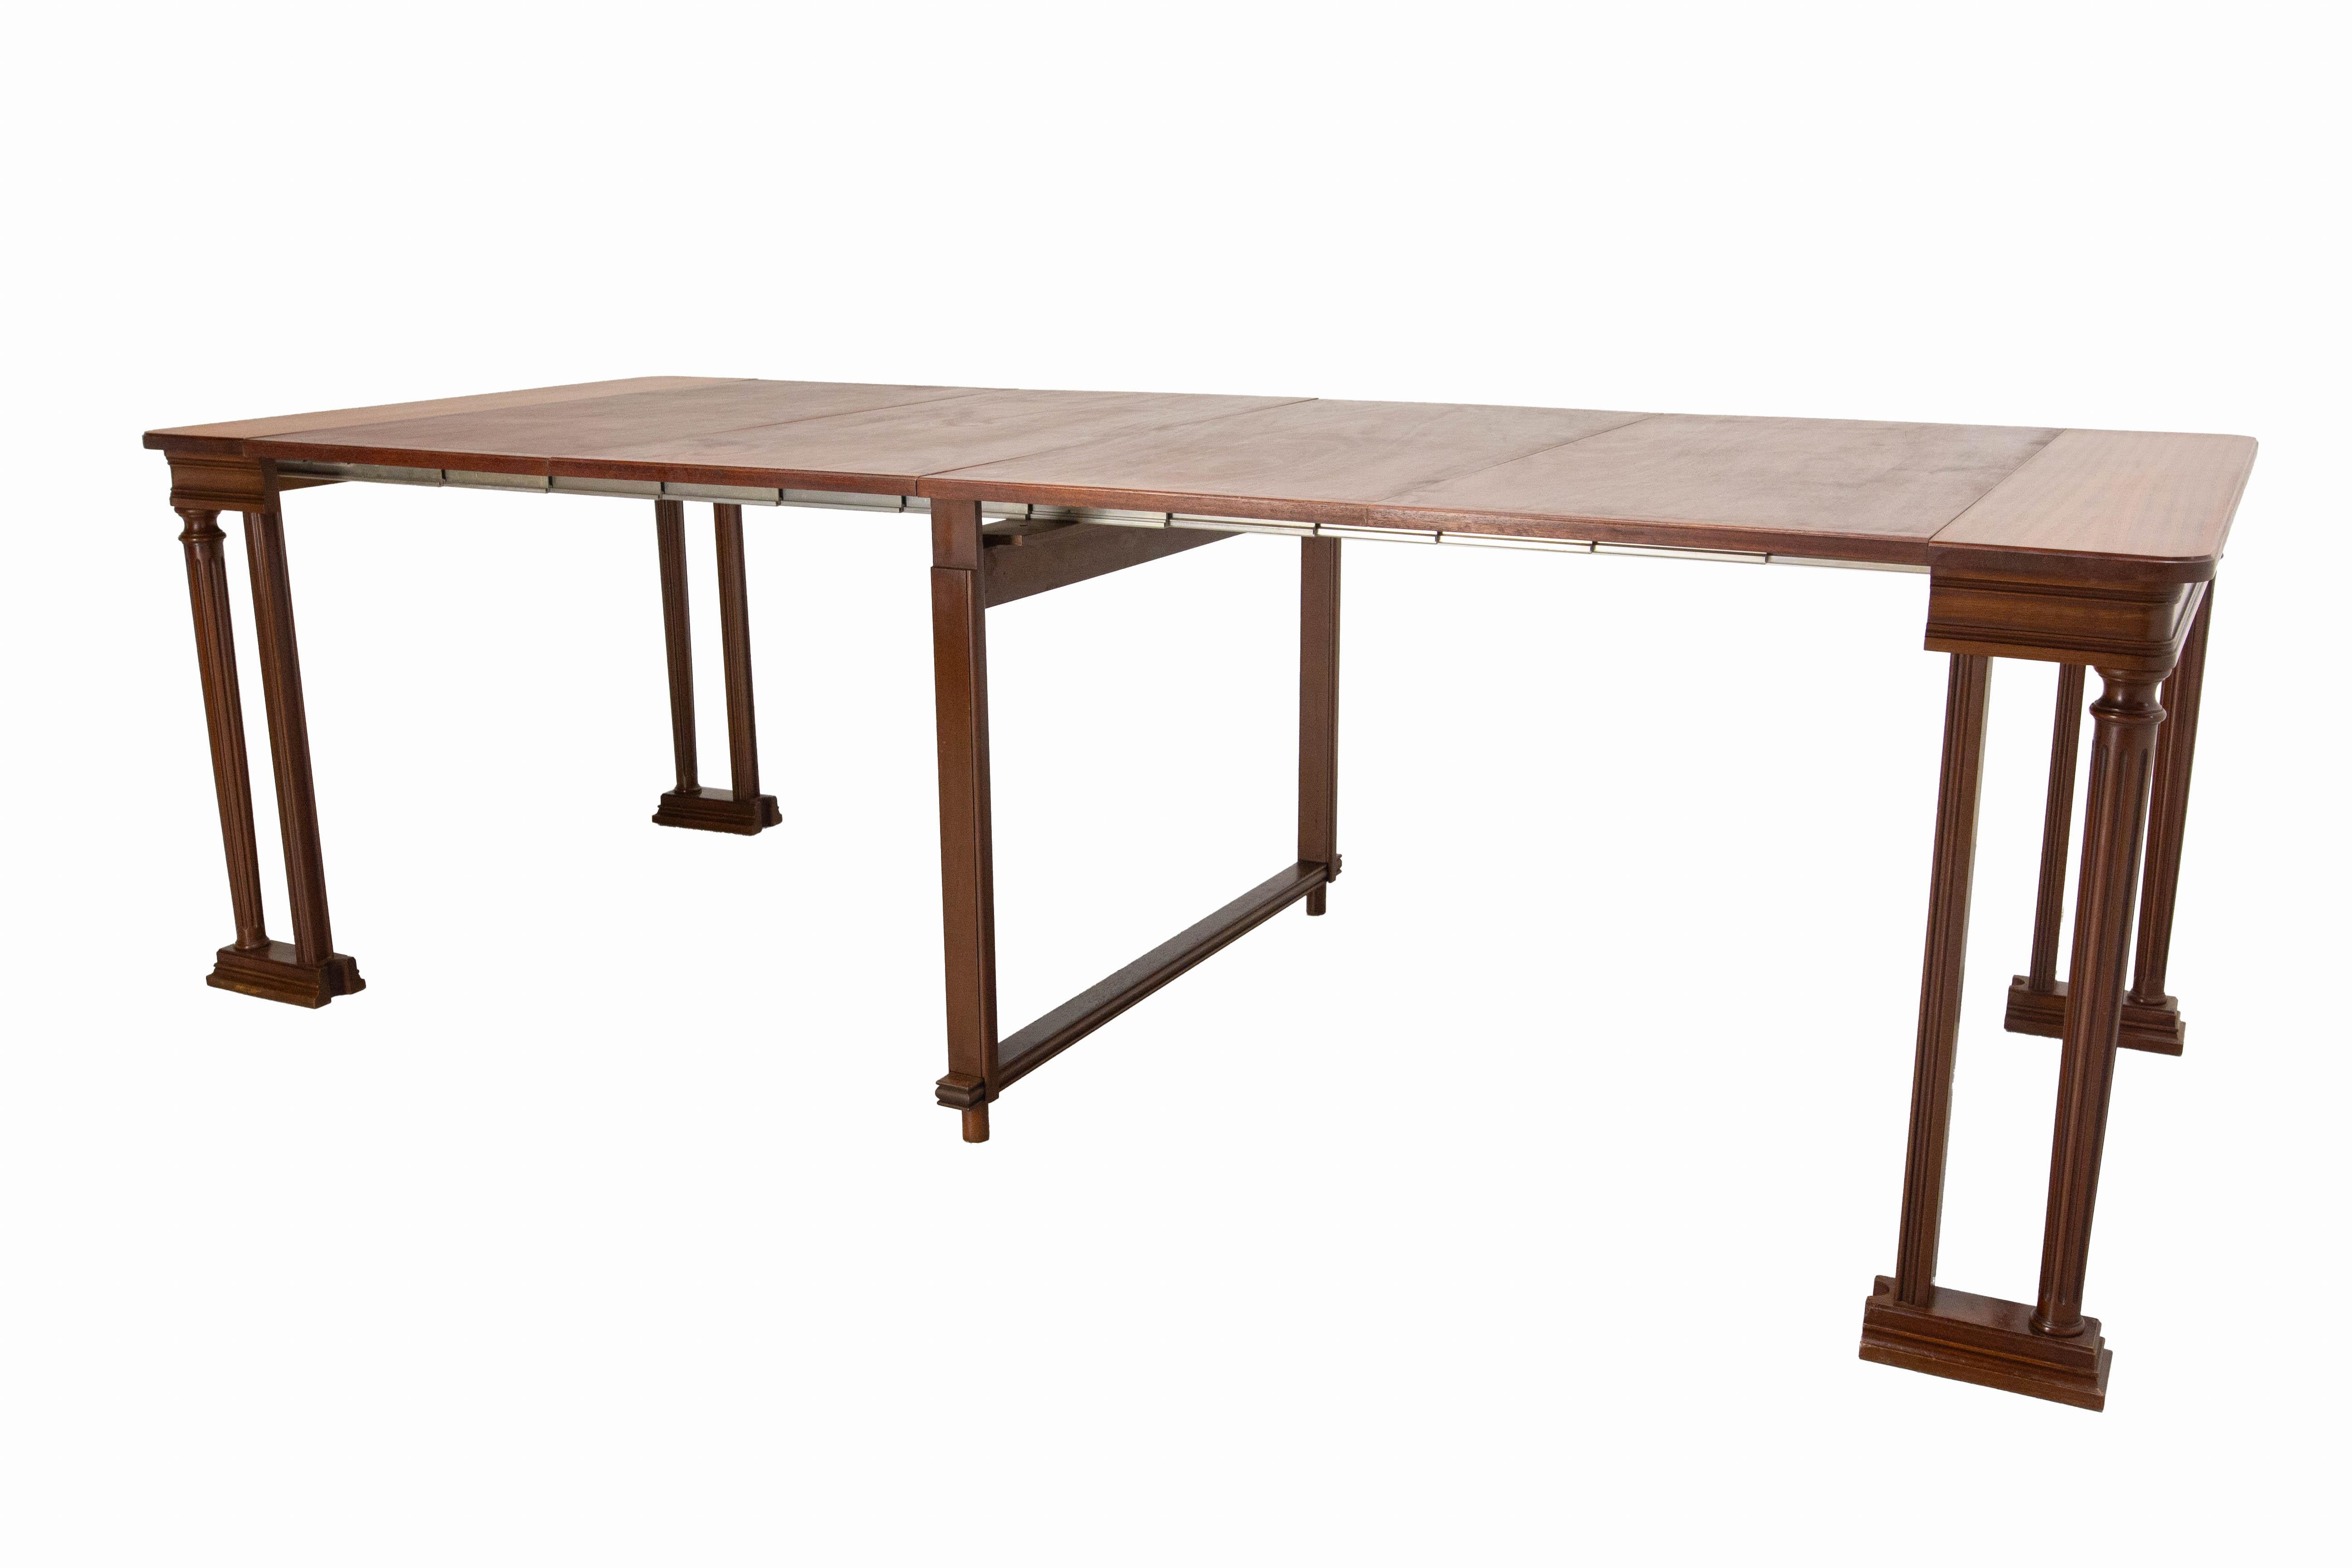 Dining table or conference table, French, circa 1970
Exotic wood and steel
When folded, the table measures only a few centimetres, which is very useful for multi-purpose rooms and it can be used as a console
Dimension D 39.37 in. W 16.54 in.  H